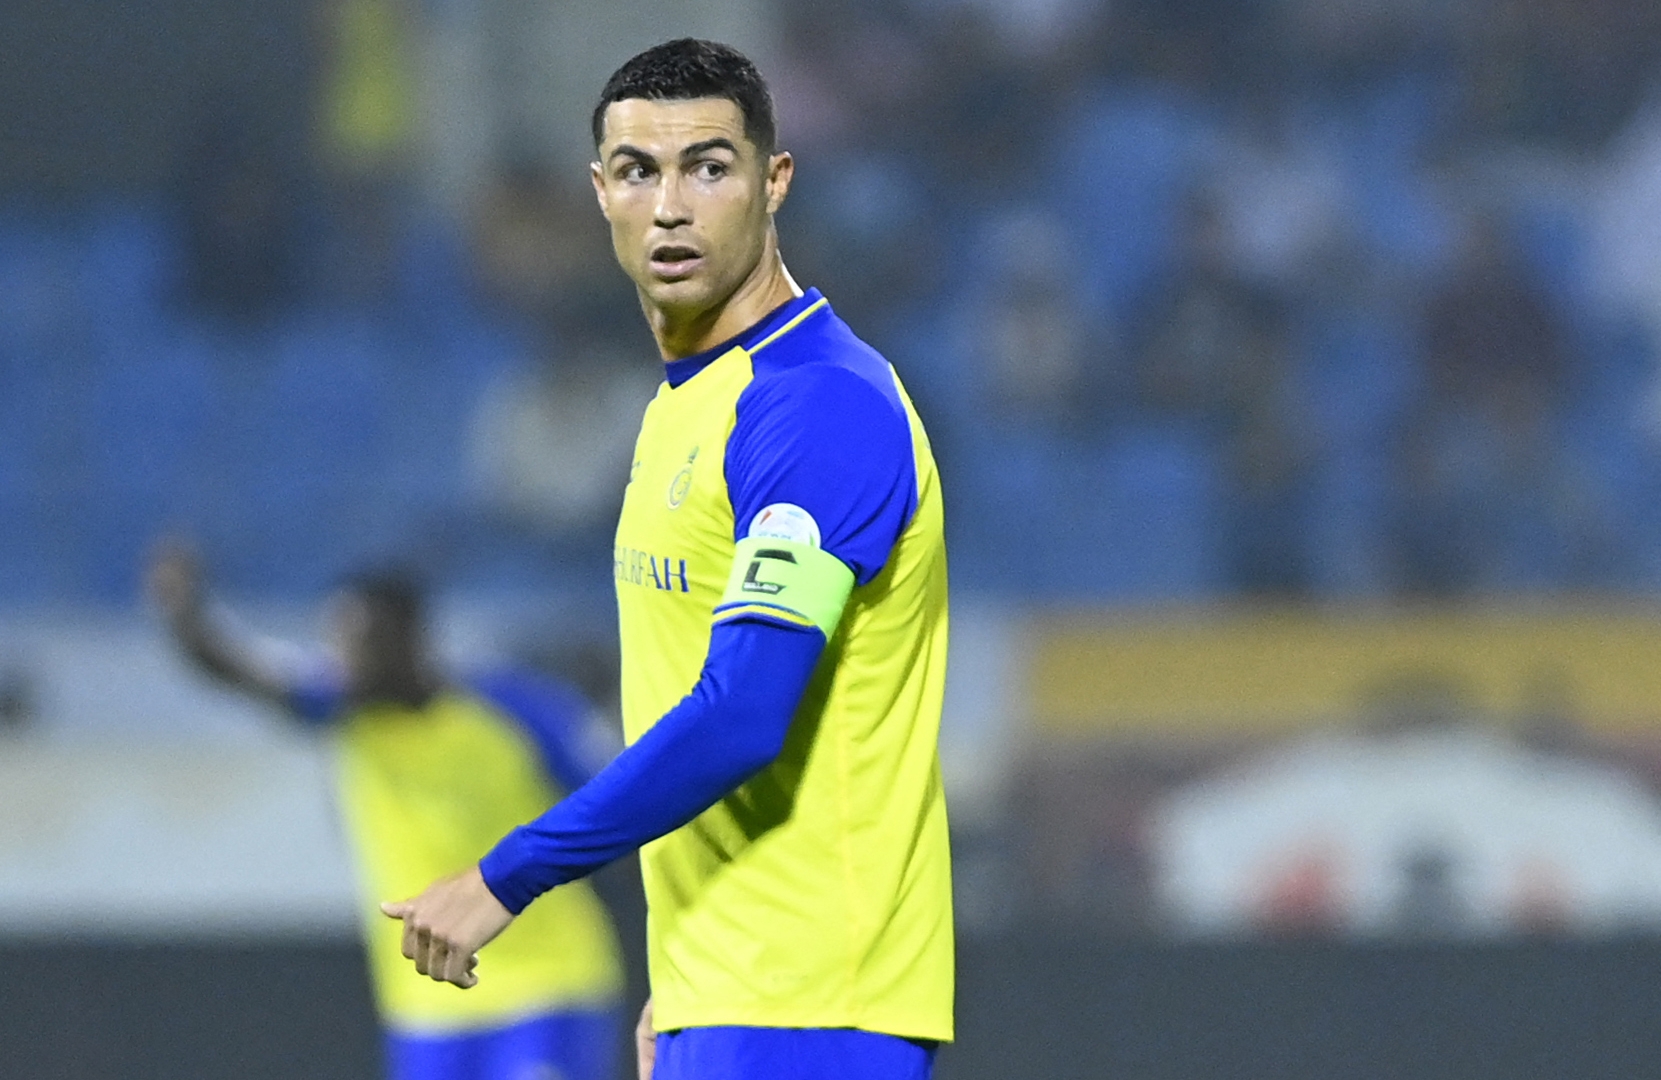 Saudi Public Investment fund, which controls Newcastle, take majority stakes in four clubs, including Cristiano Ronaldo's Al Nassr